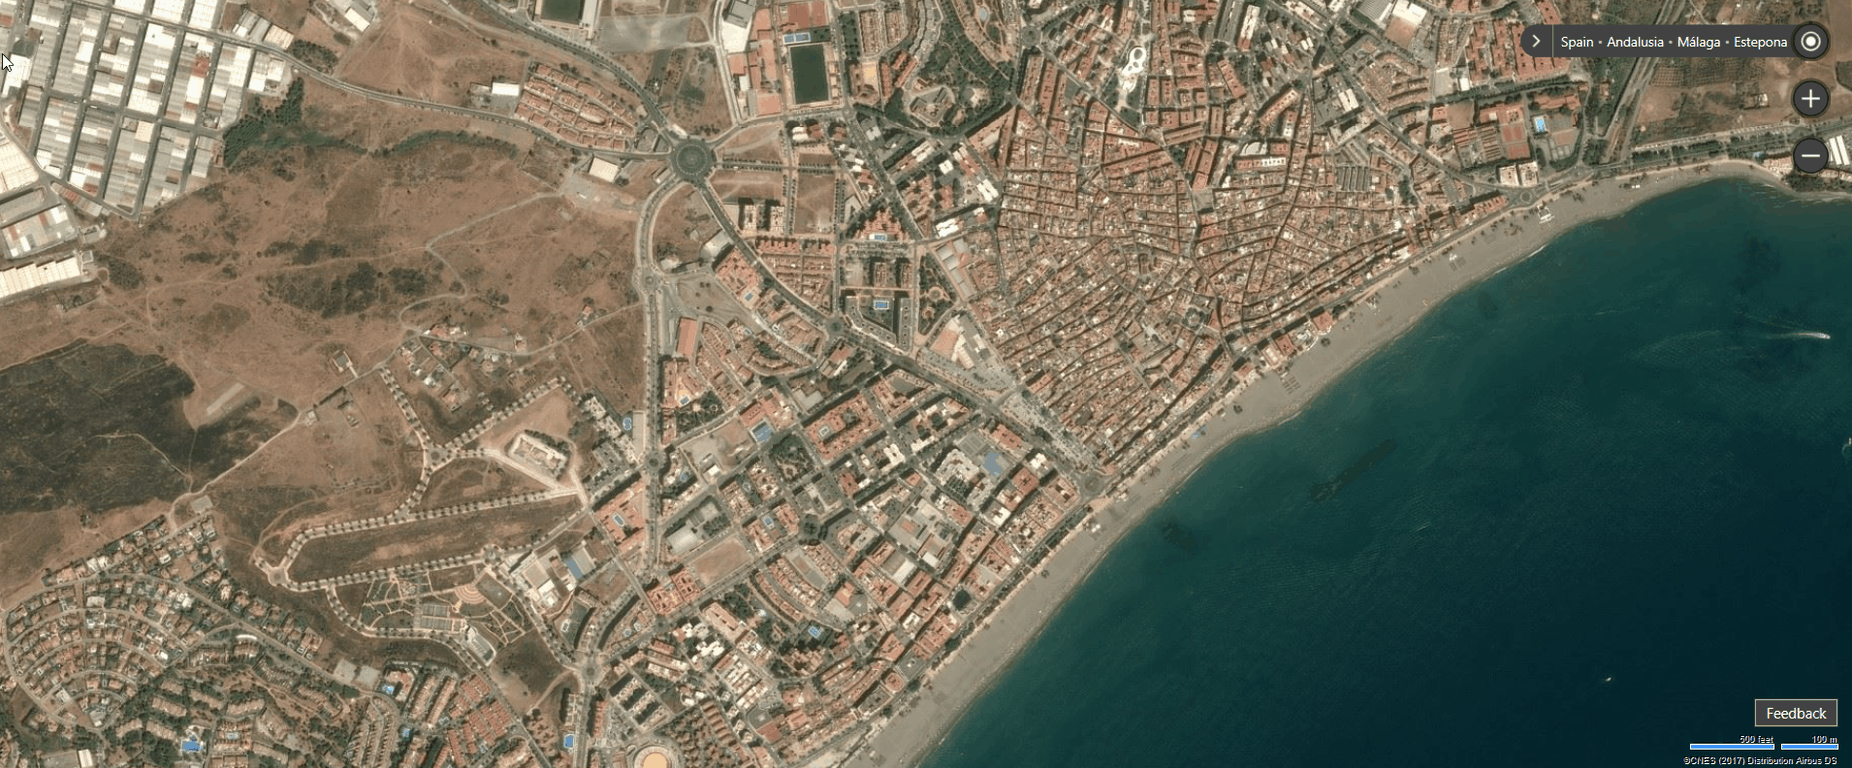 Bing Maps adds aerial imagery for 41 cities in Spain - OnMSFT.com